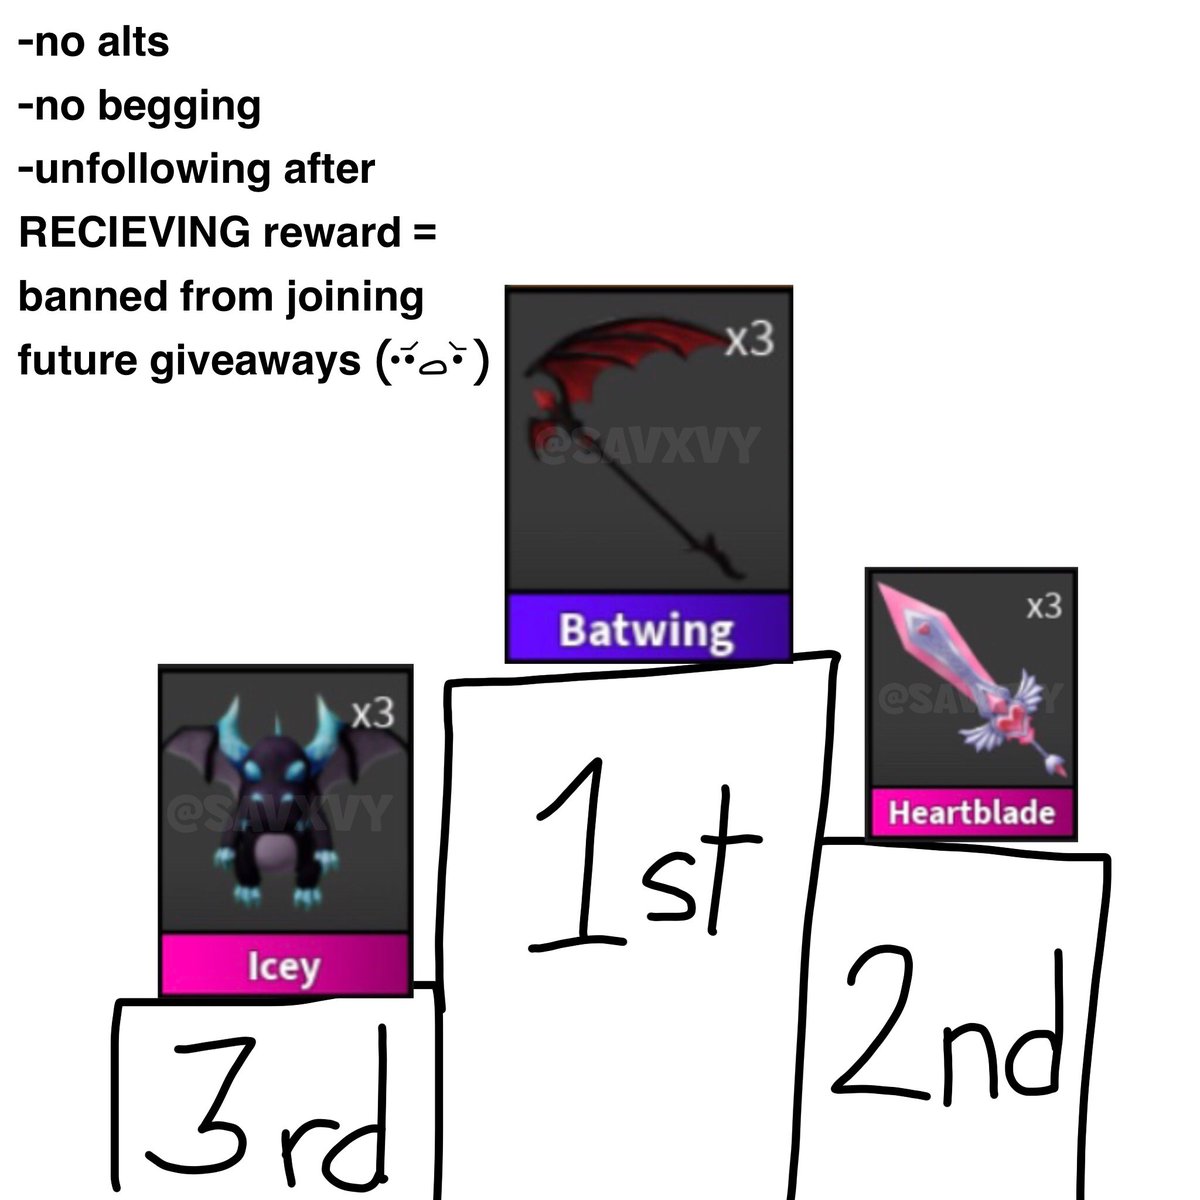 eggblade is gonna be 0 and idk what to say about icewing and batwing :  r/MurderMystery2